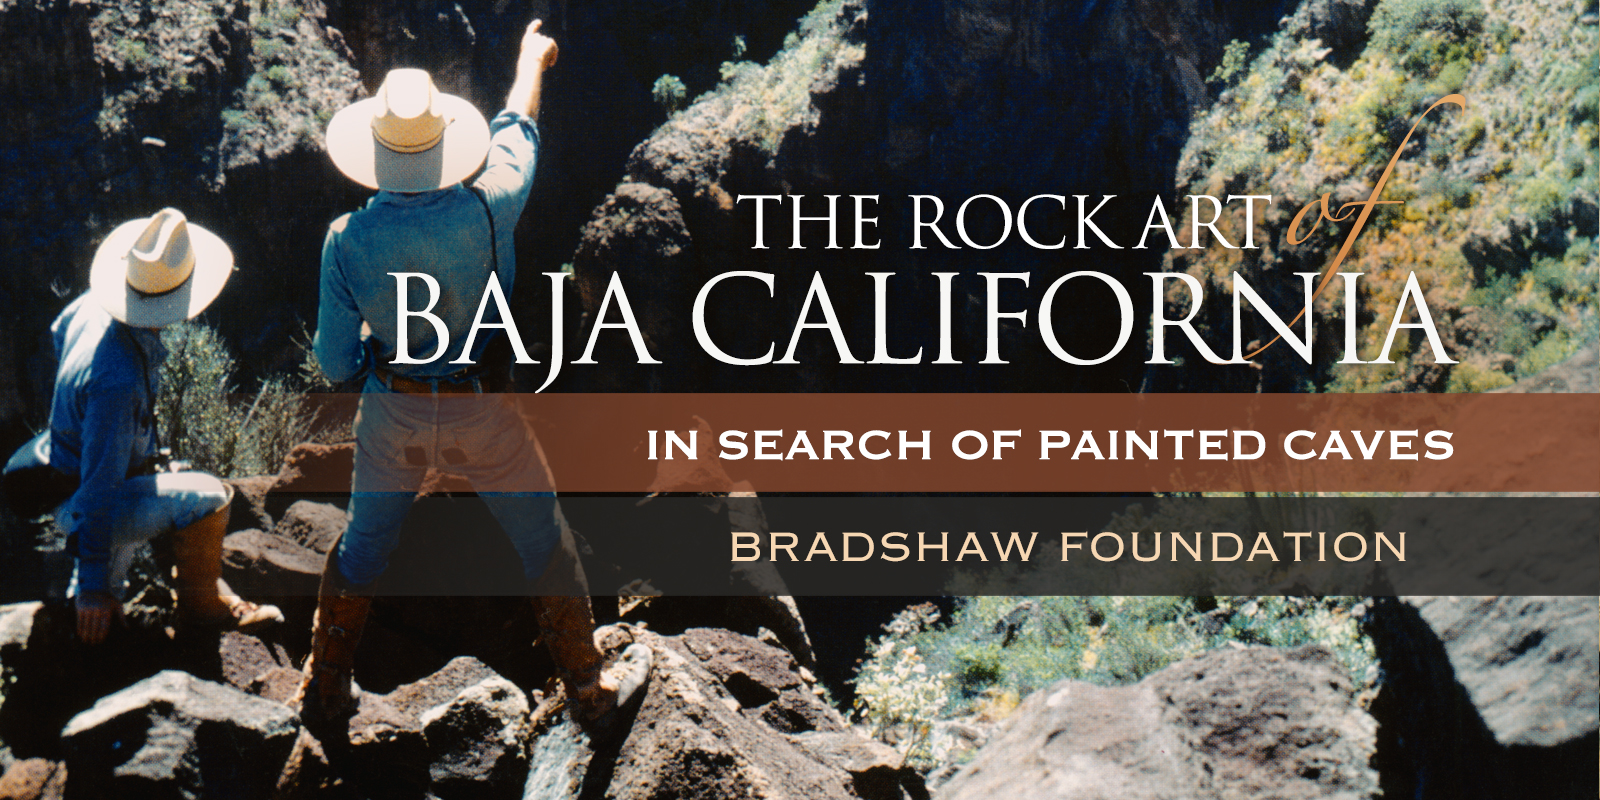 Rock Art America USA Bradshaw Foundation Baja California In Search of Painted Cave Mexico Petroglyphs Pictographs Archaeology Prehistory